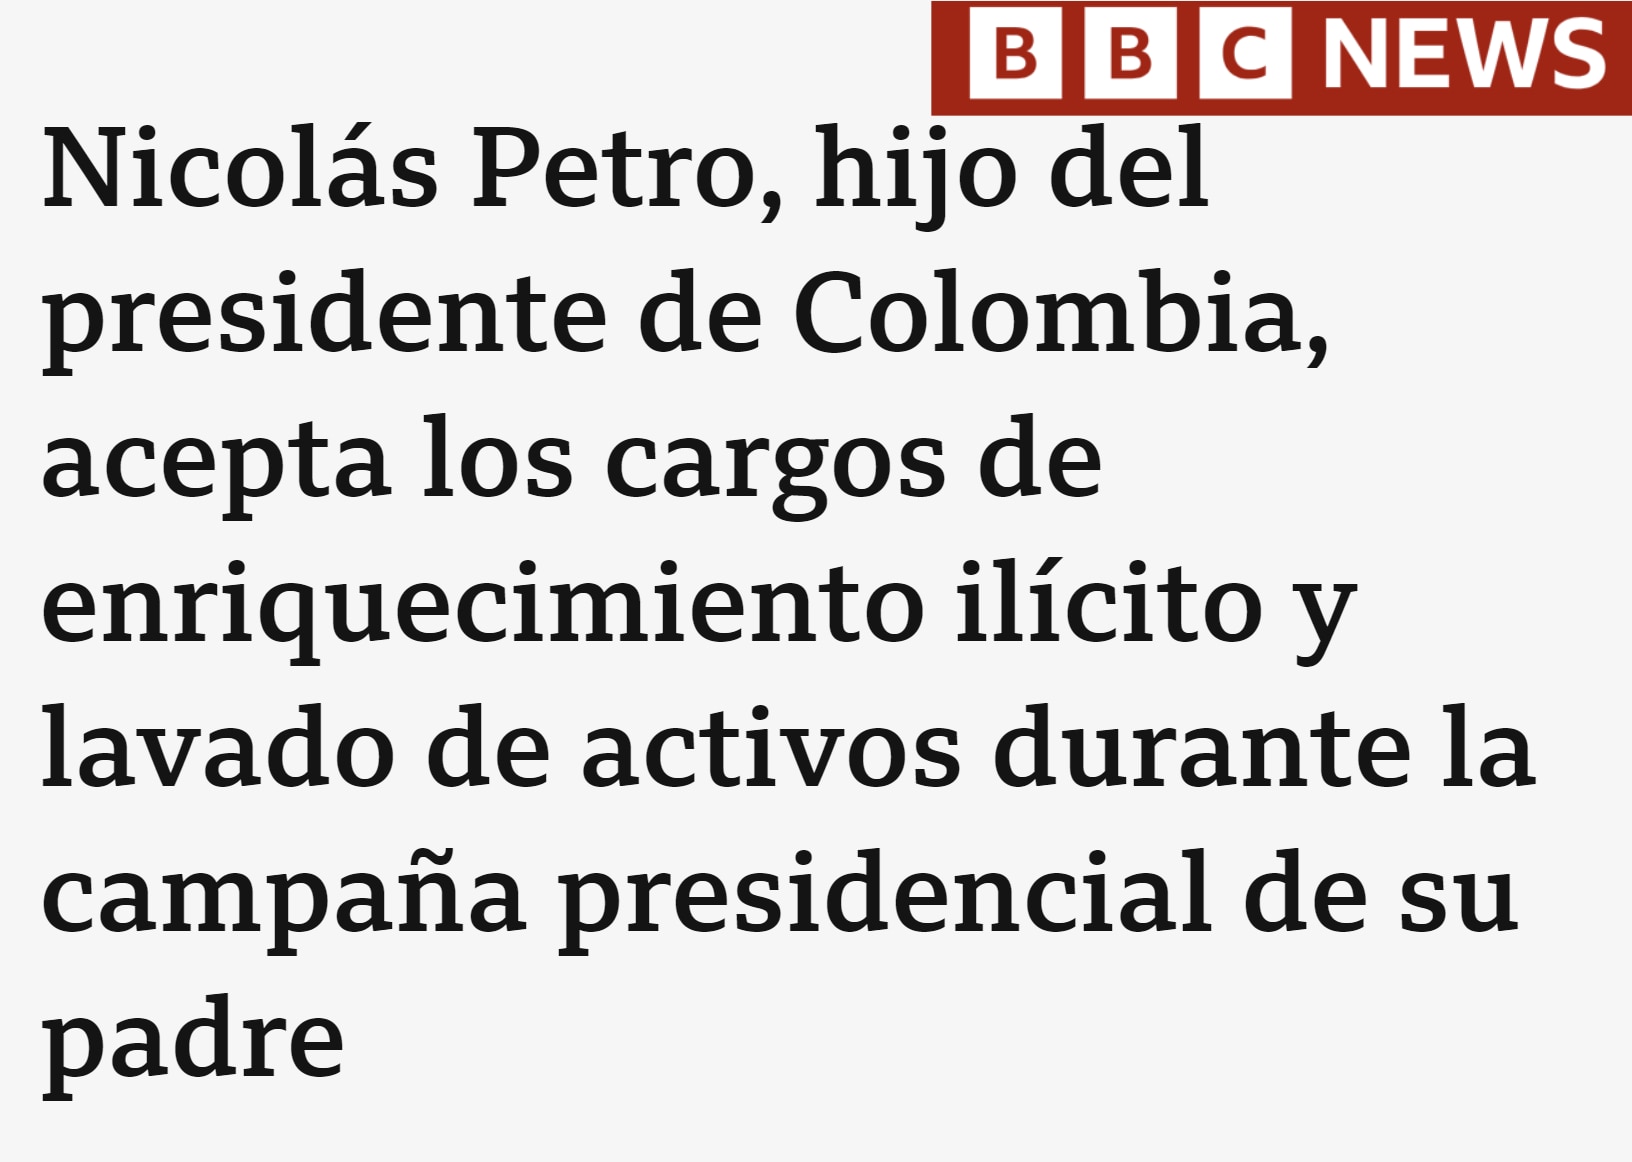 Half BBC News talks about the case of Nicolás Petro about his confession of "hot money".